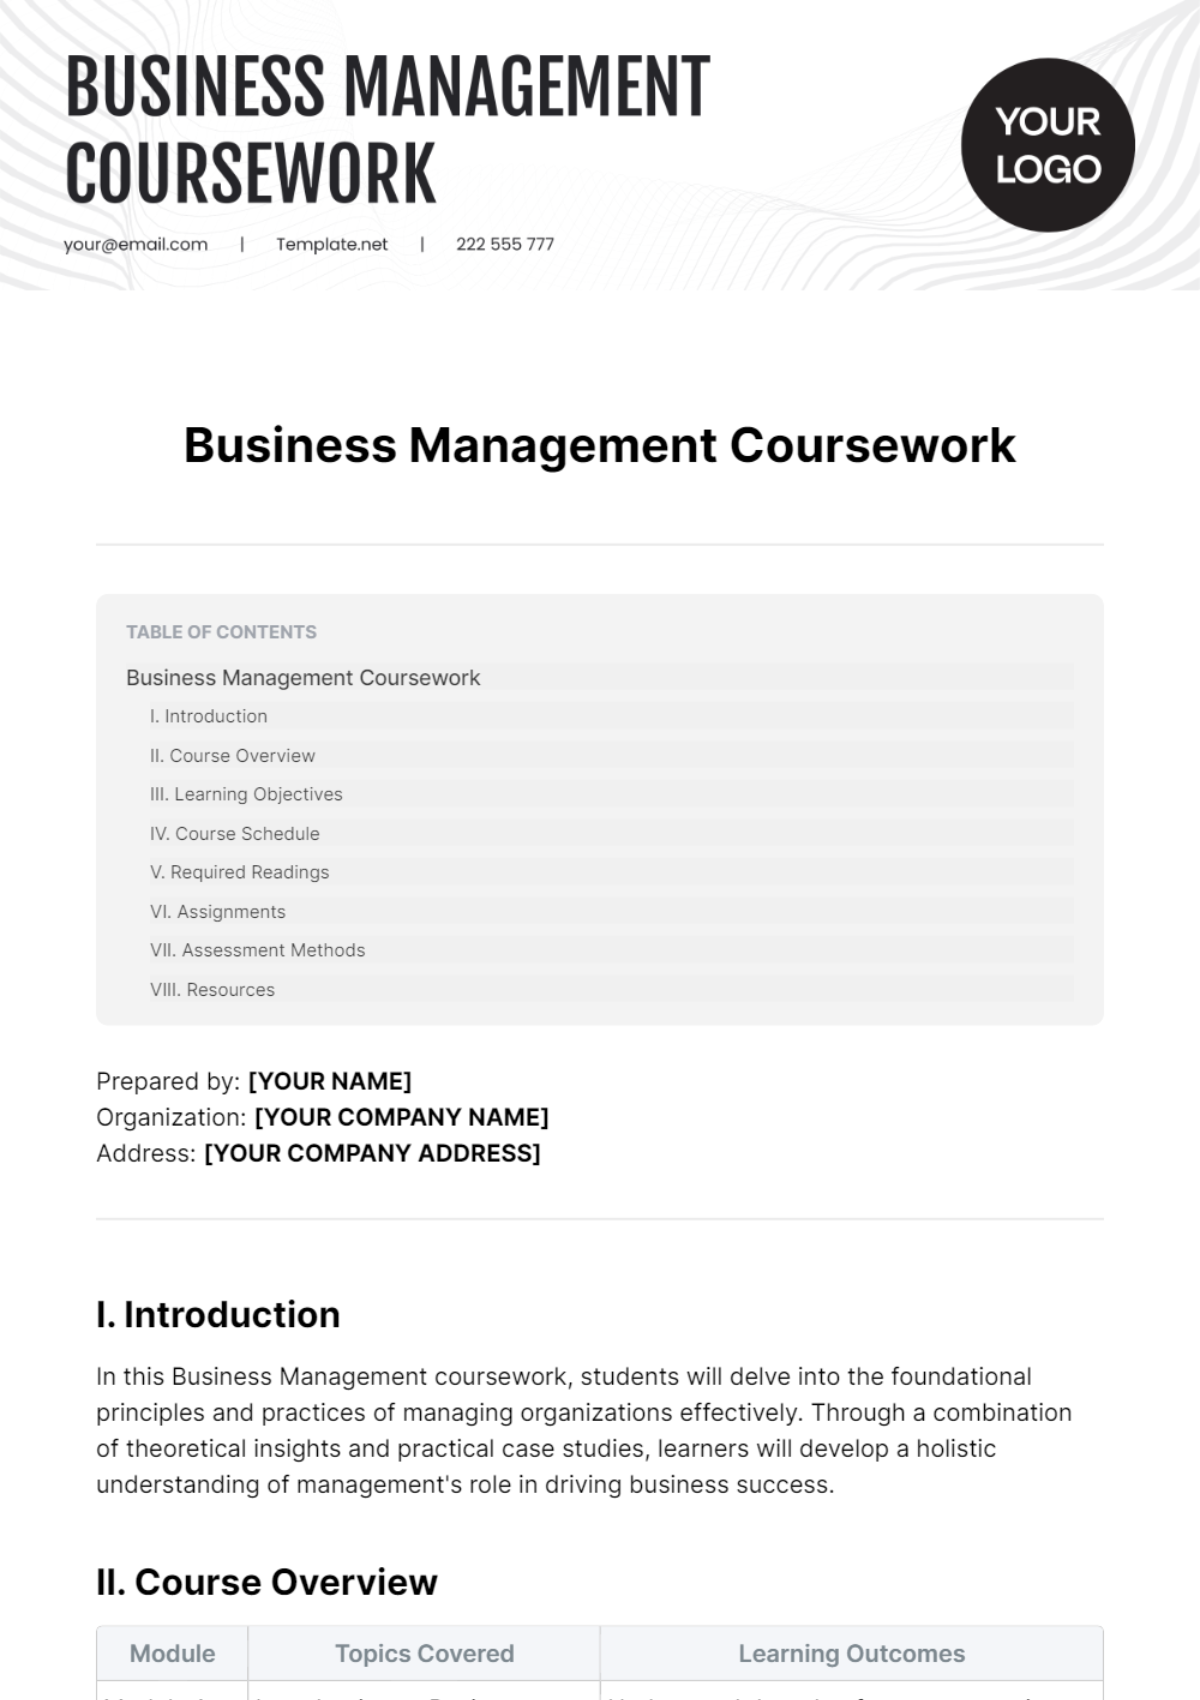 Business Management Coursework Template